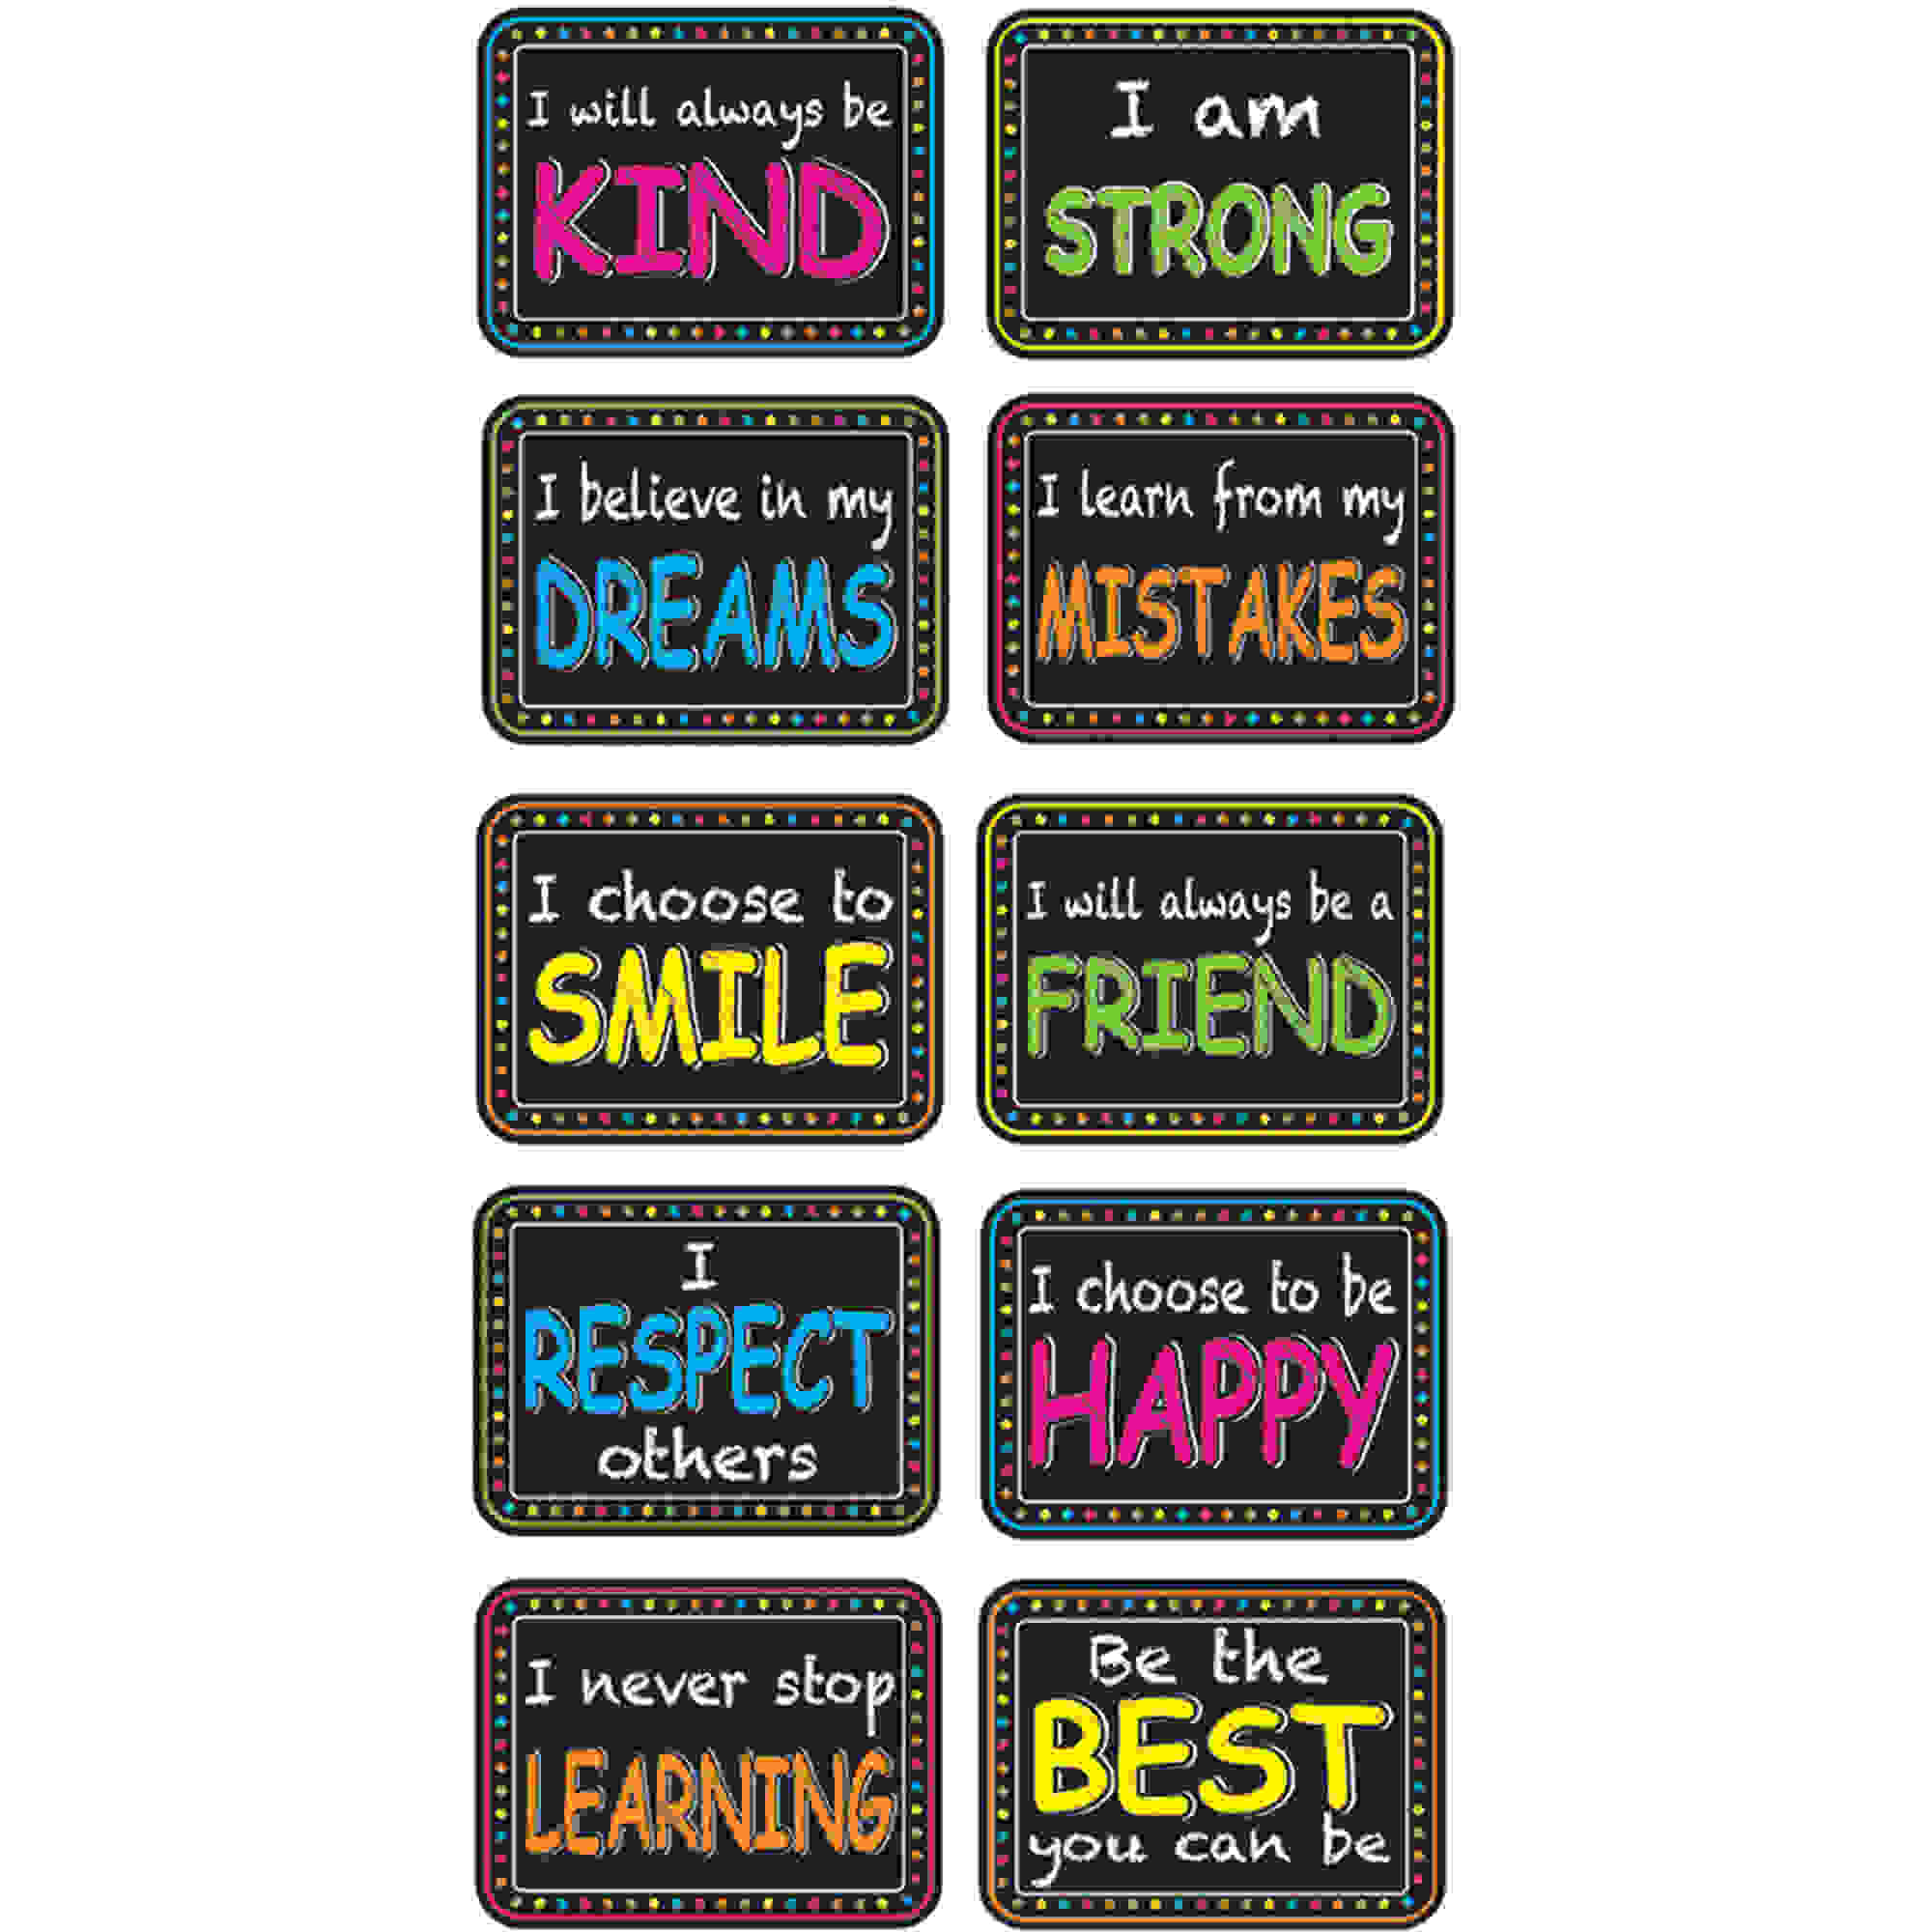 Non-Magnetic Mini Whiteboard Erasers, Character Building, Pack of 10